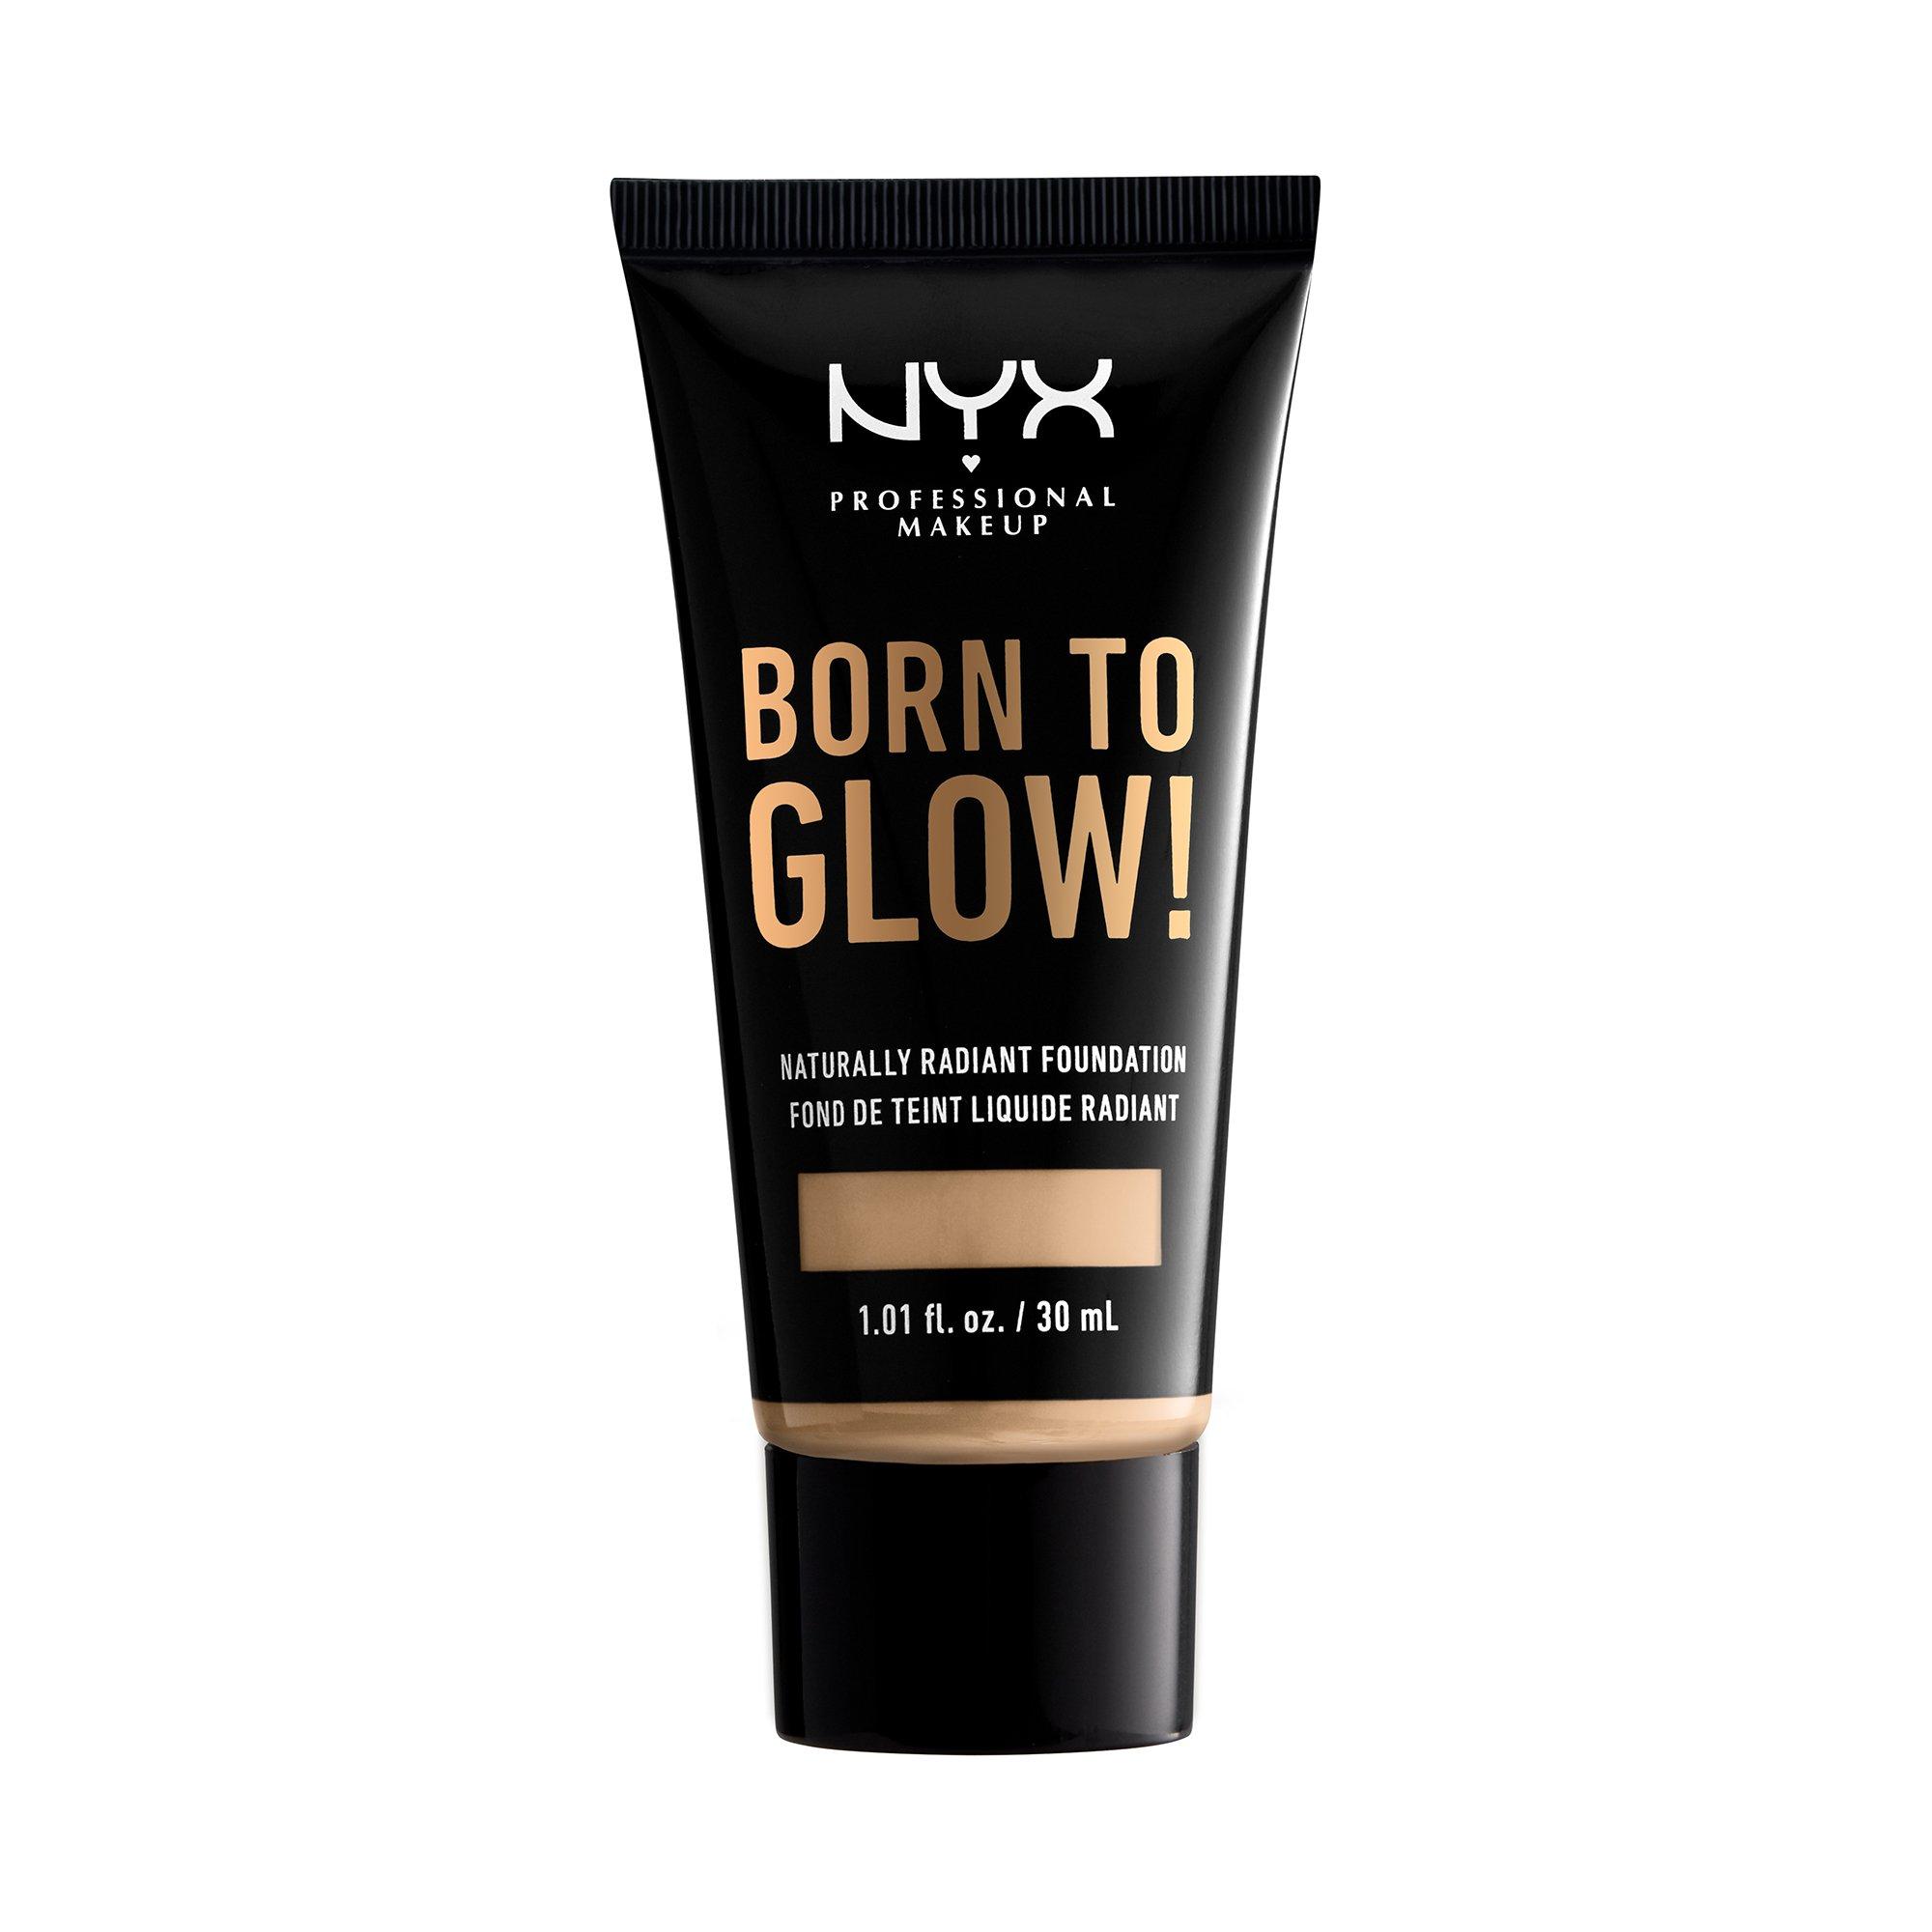 Image of NYX-PROFESSIONAL-MAKEUP Born To Glow Born To Glow Naturally Radiant Foundation - 30ml